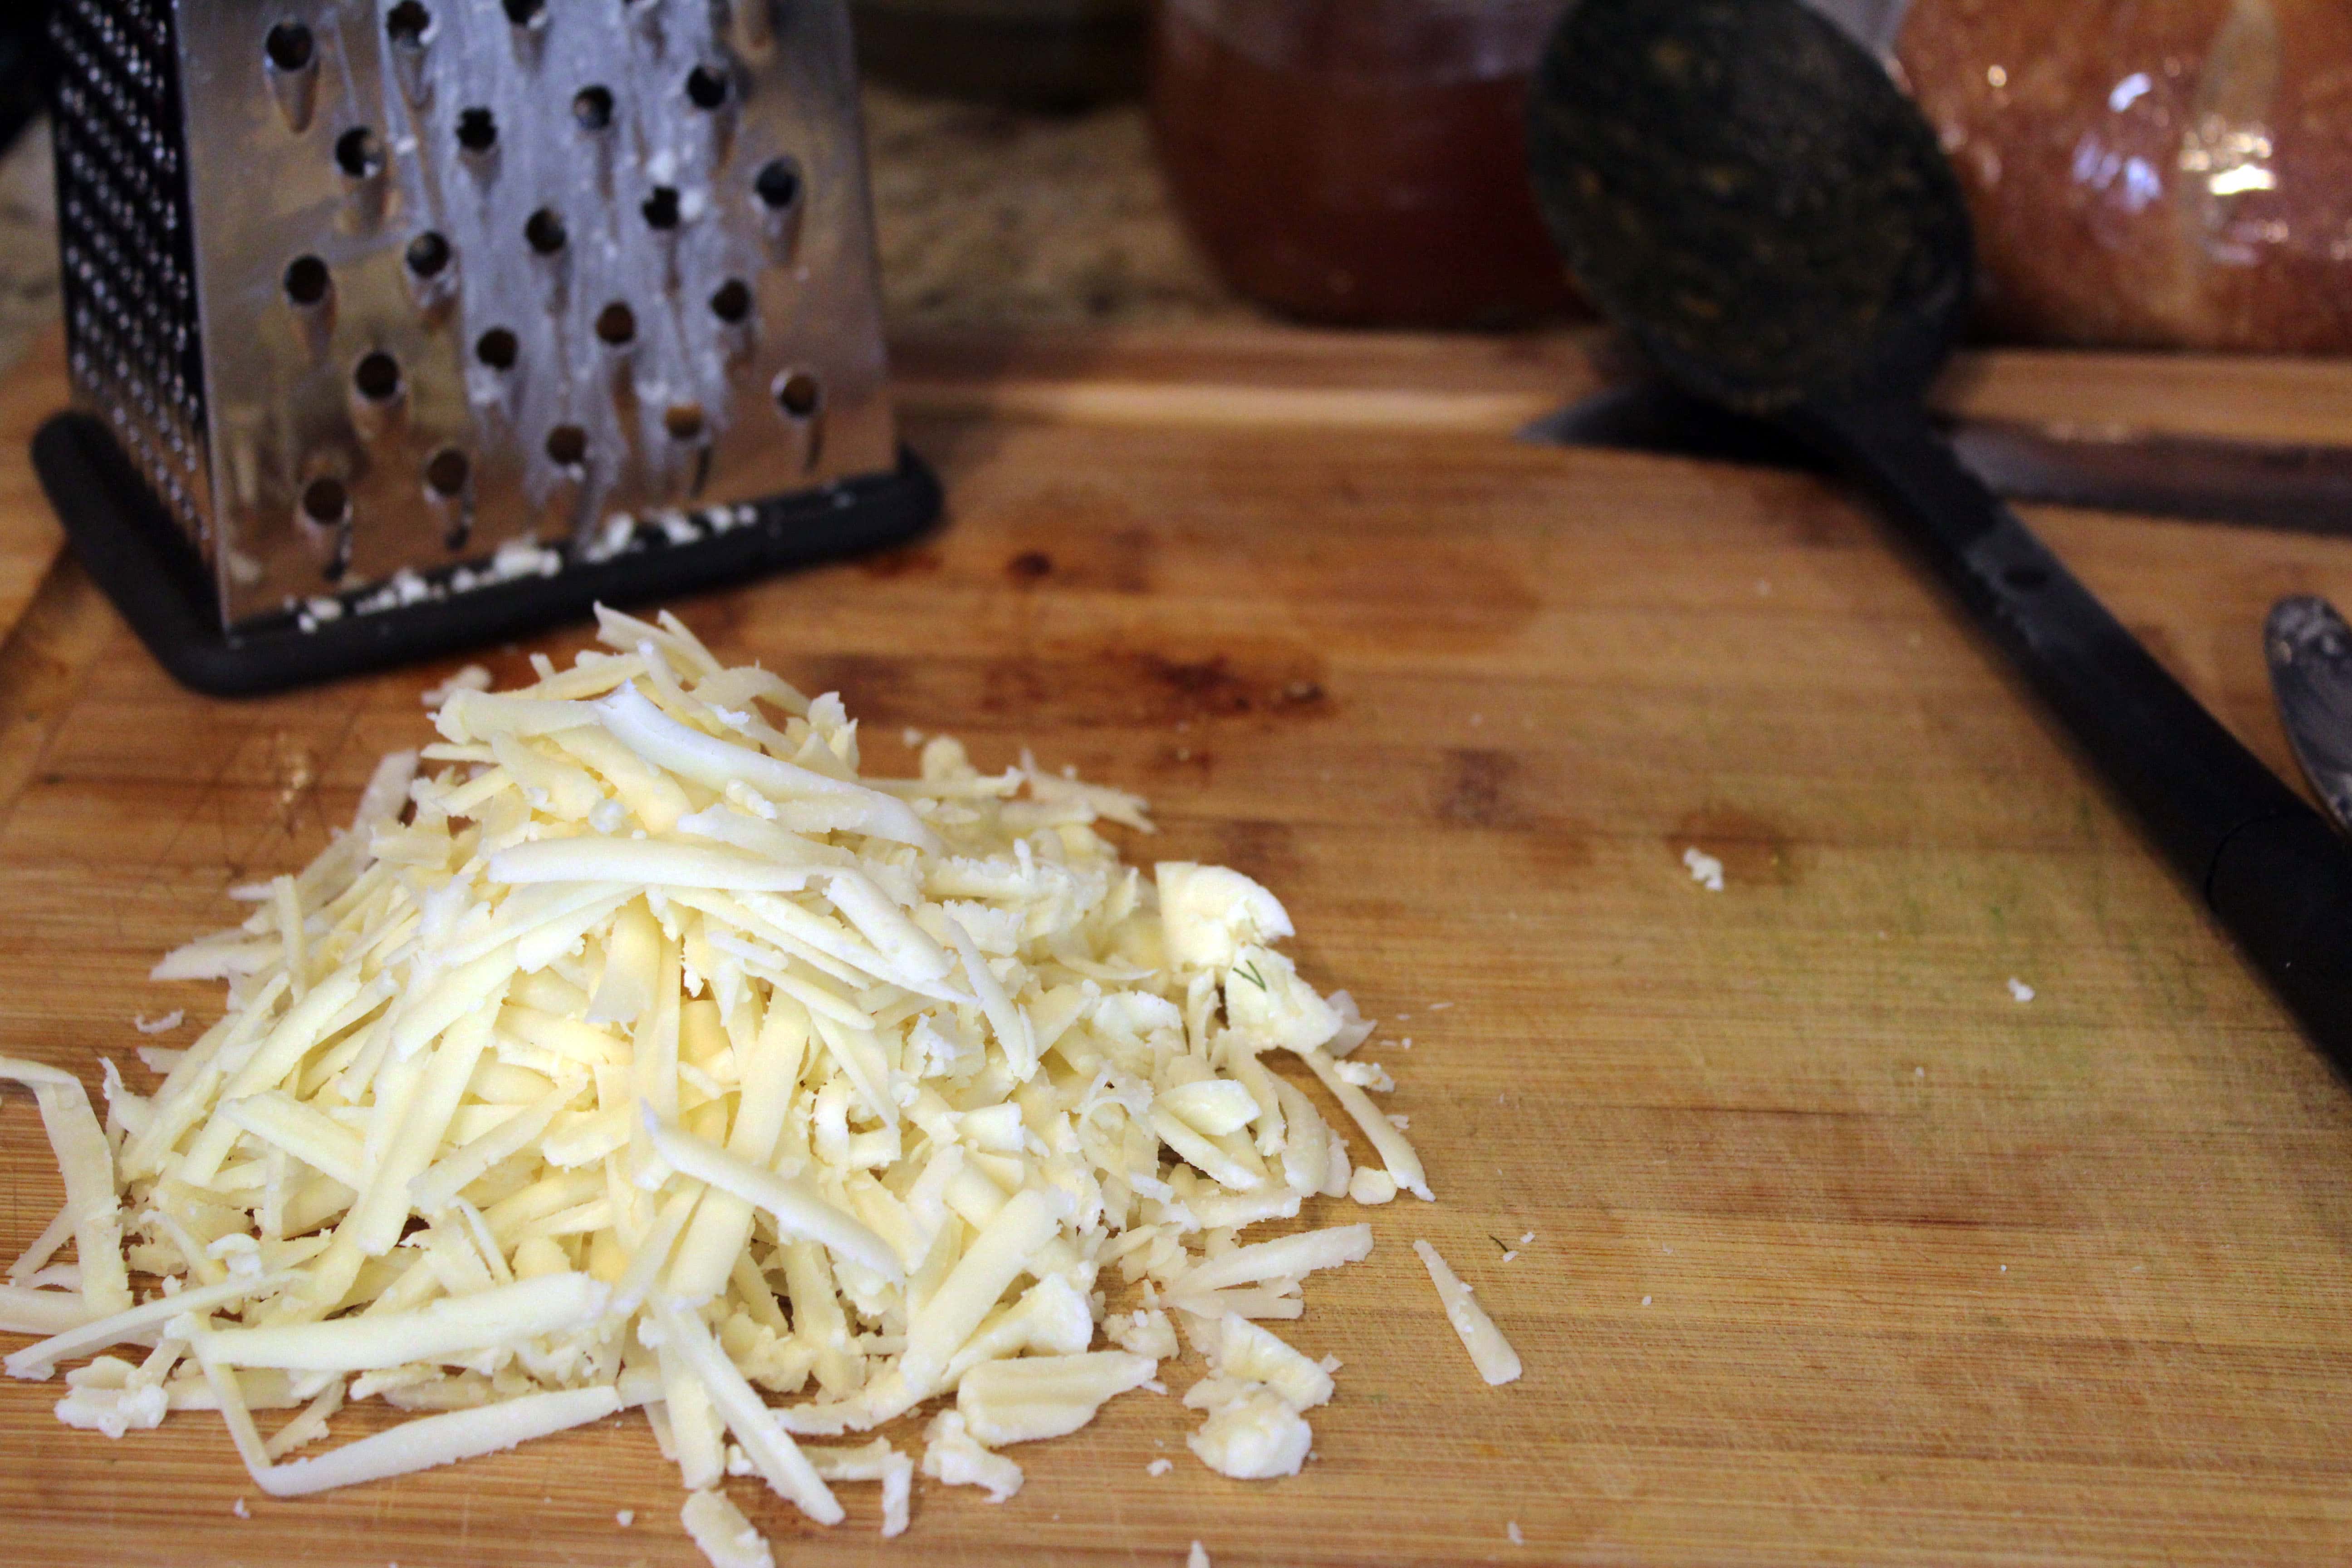 Grate cheese while veggies cook